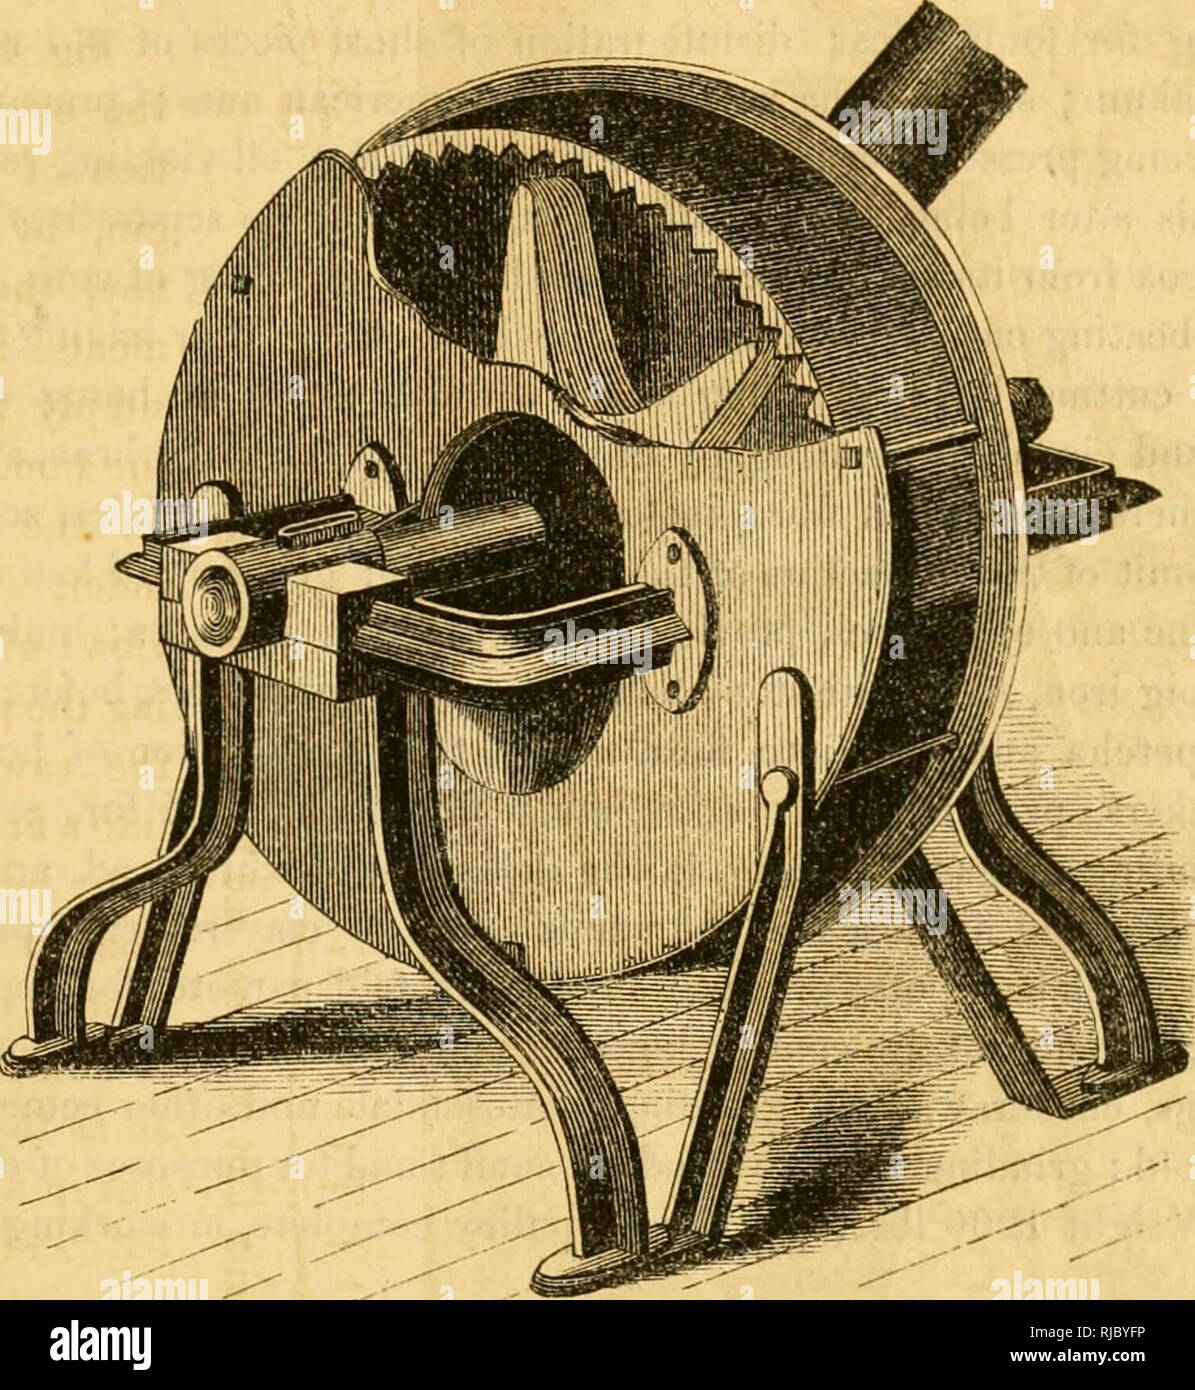 https://c8.alamy.com/comp/RJBYFP/charles-v-mapes-agricultural-machinery-c-v-mapes-illustrated-catalogue-231-howells-quartz-crusher-and-universal-mill-fig-430-howells-quartz-crasher-and-universal-mill-fig-430-represents-this-extraordinary-mill-which-is-capable-of-crushing-a-larger-amount-of-material-with-a-less-expenditure-of-power-than-any-other-mill-now-in-use-the-engraving-fully-represents-all-the-parts-and-a-portion-of-the-side-left-off-to-exhibit-the-arms-shows-its-inside-structure-the-shell-is-three-feet-diameter-and-five-inches-wide-a-steel-shaft-passes-through-the-centre-armed-with-six-pro-jec-RJBYFP.jpg